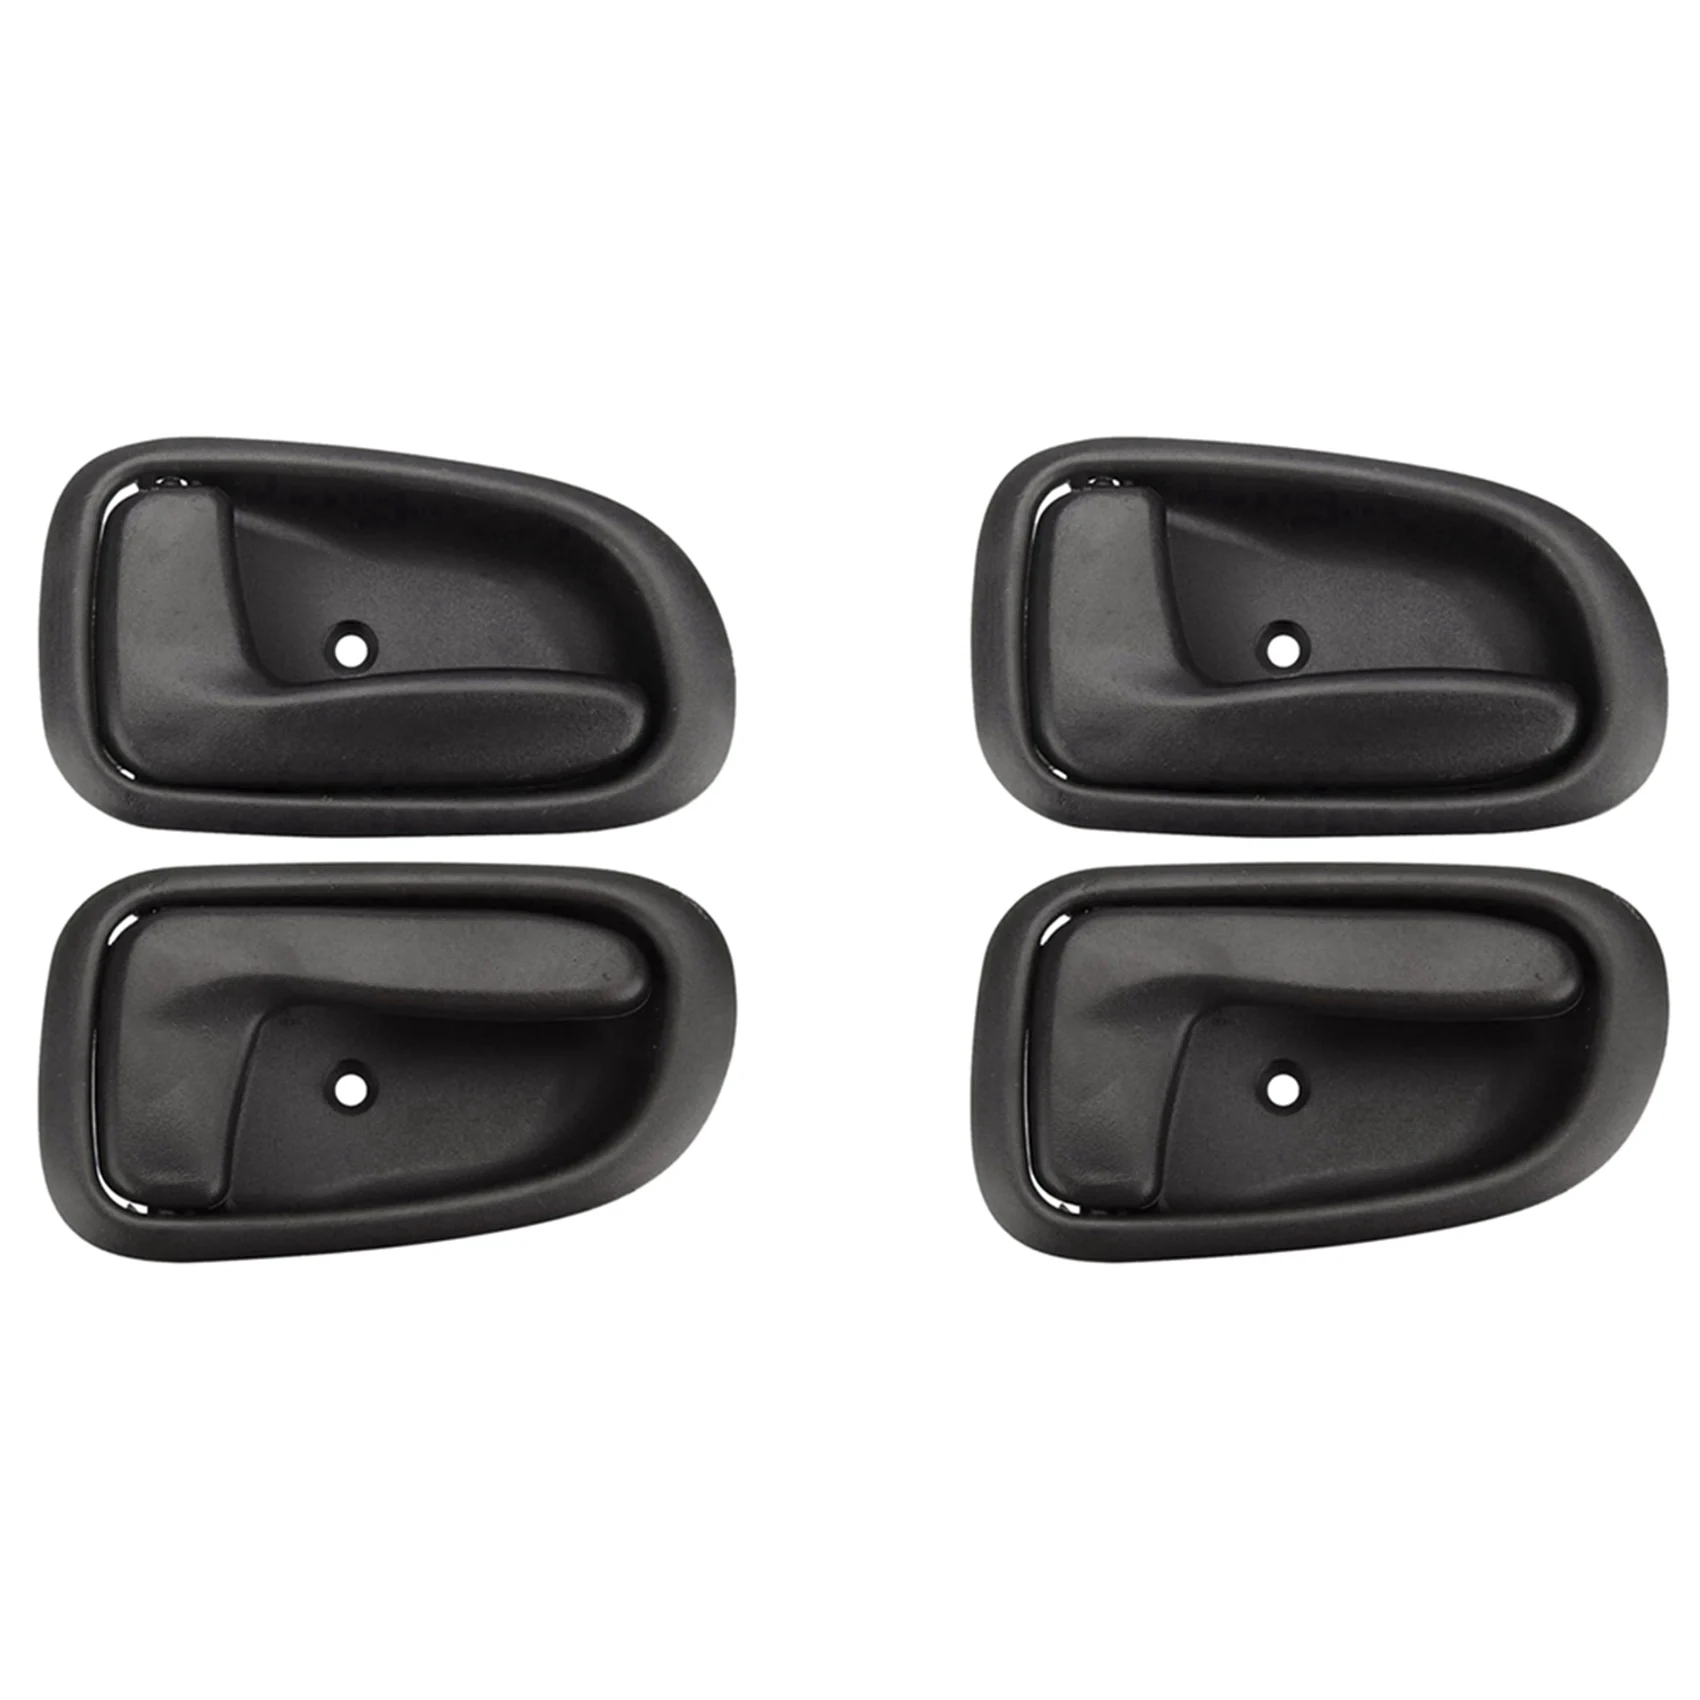 

2X Car Inside Interior Door Handle Black Left/Right Side Front Rear for Toyota Corolla GEO PRIZM 1993-1997